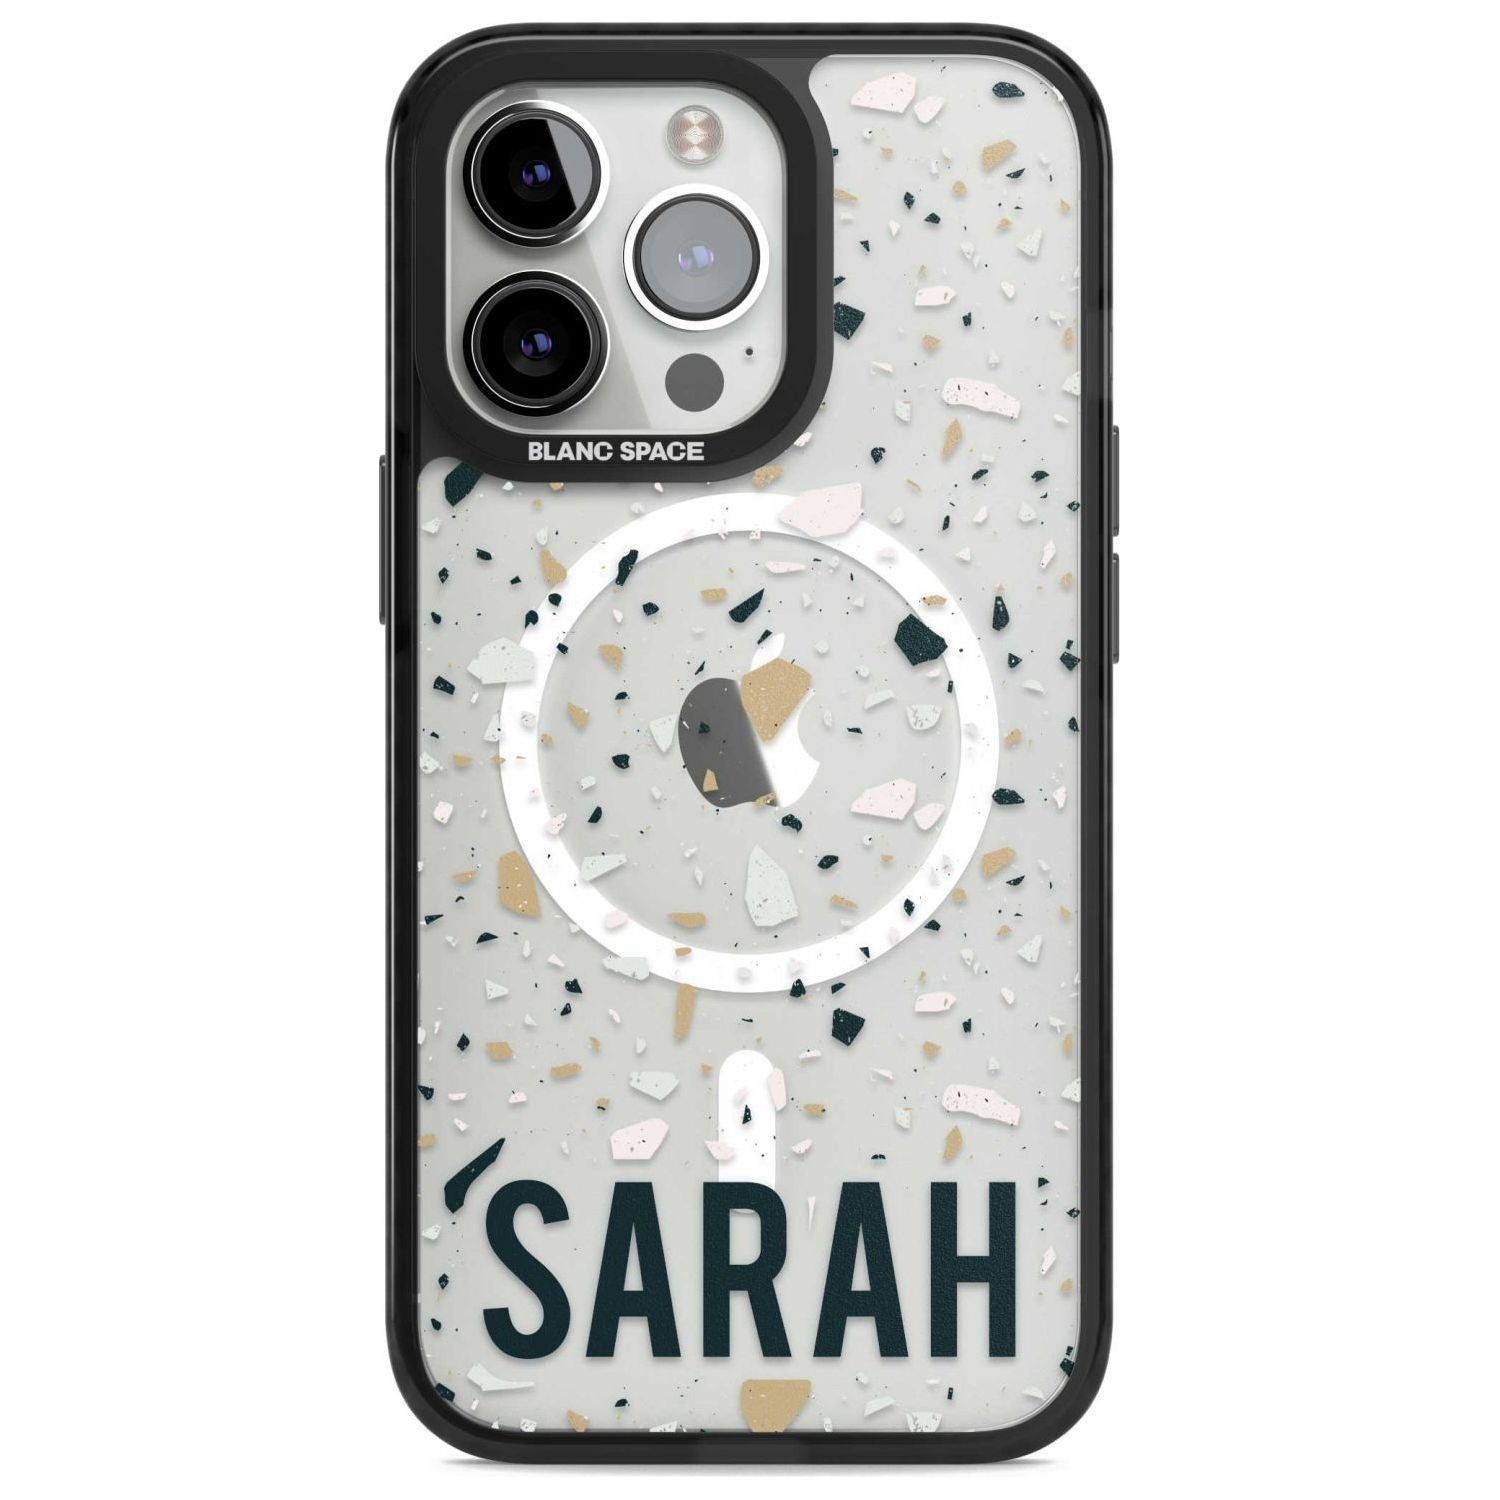 Personalised Terrazzo - Blue, Pink, Brown Custom Phone Case iPhone 15 Pro Max / Magsafe Black Impact Case,iPhone 15 Pro / Magsafe Black Impact Case,iPhone 14 Pro Max / Magsafe Black Impact Case,iPhone 14 Pro / Magsafe Black Impact Case,iPhone 13 Pro / Magsafe Black Impact Case Blanc Space